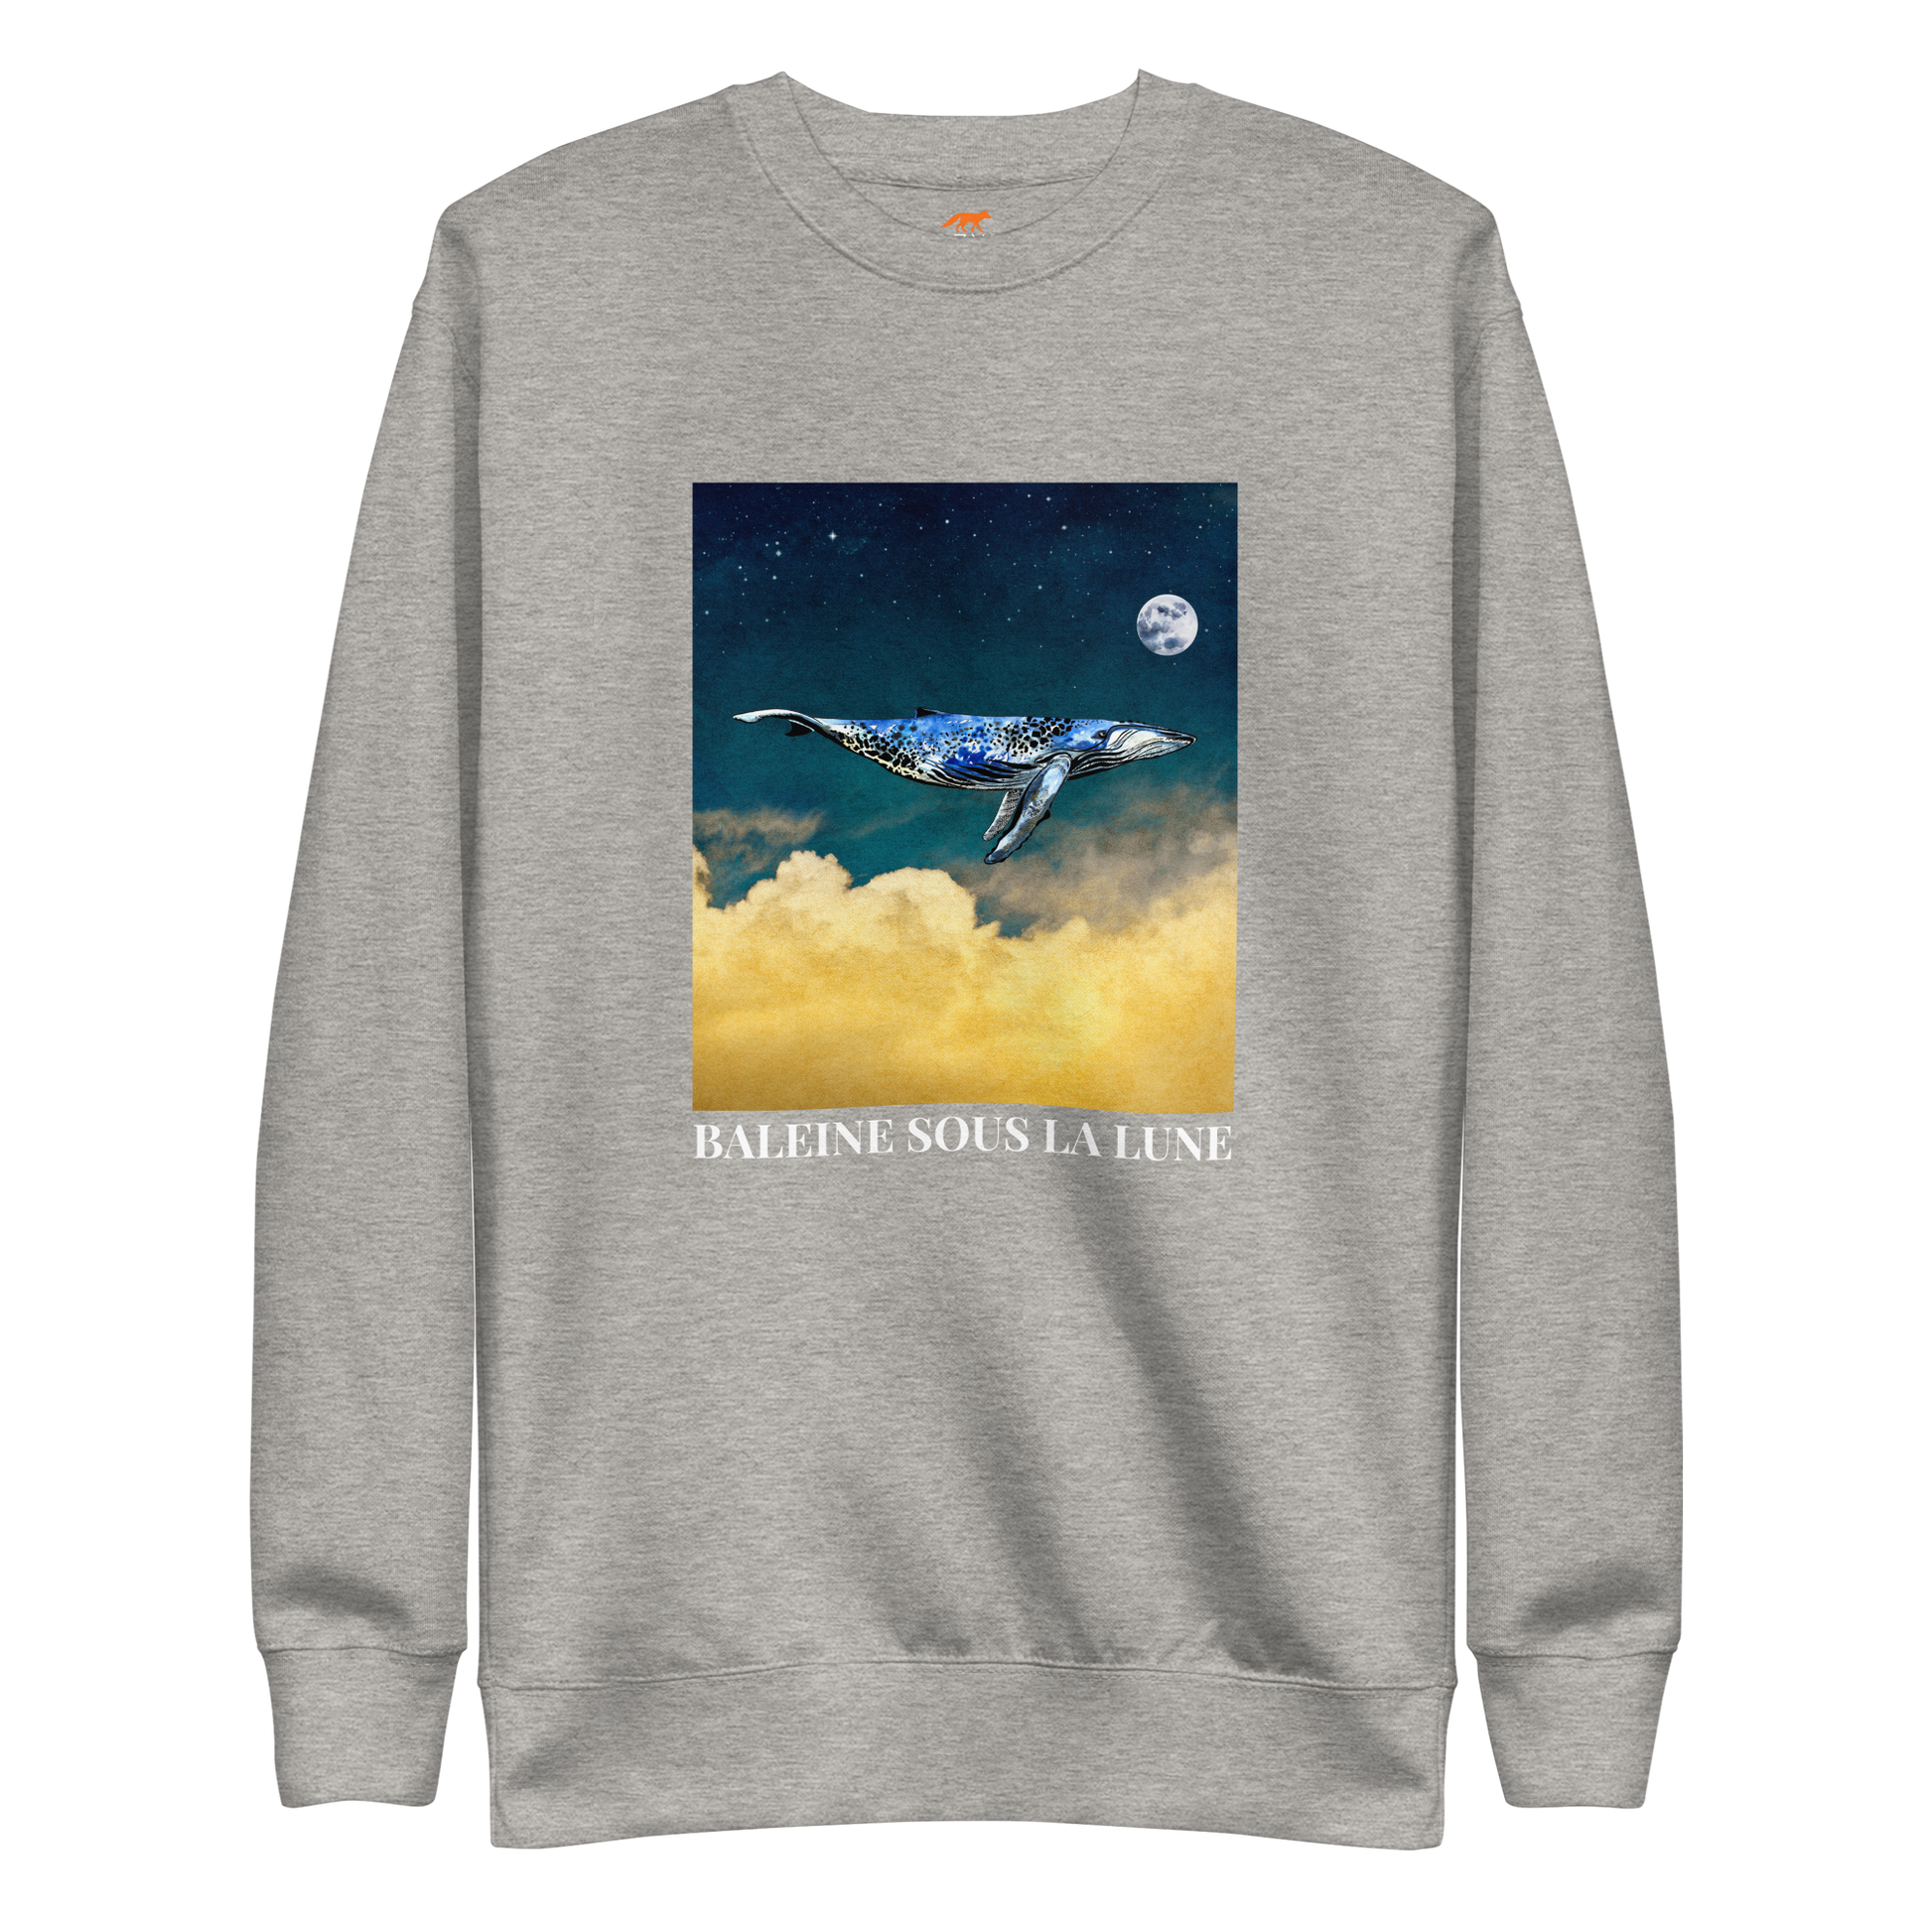 Carbon Grey Premium Whale Sweatshirt featuring a majestic Whale Under The Moon graphic on the chest - Cool Graphic Whale Sweatshirts - Boozy Fox